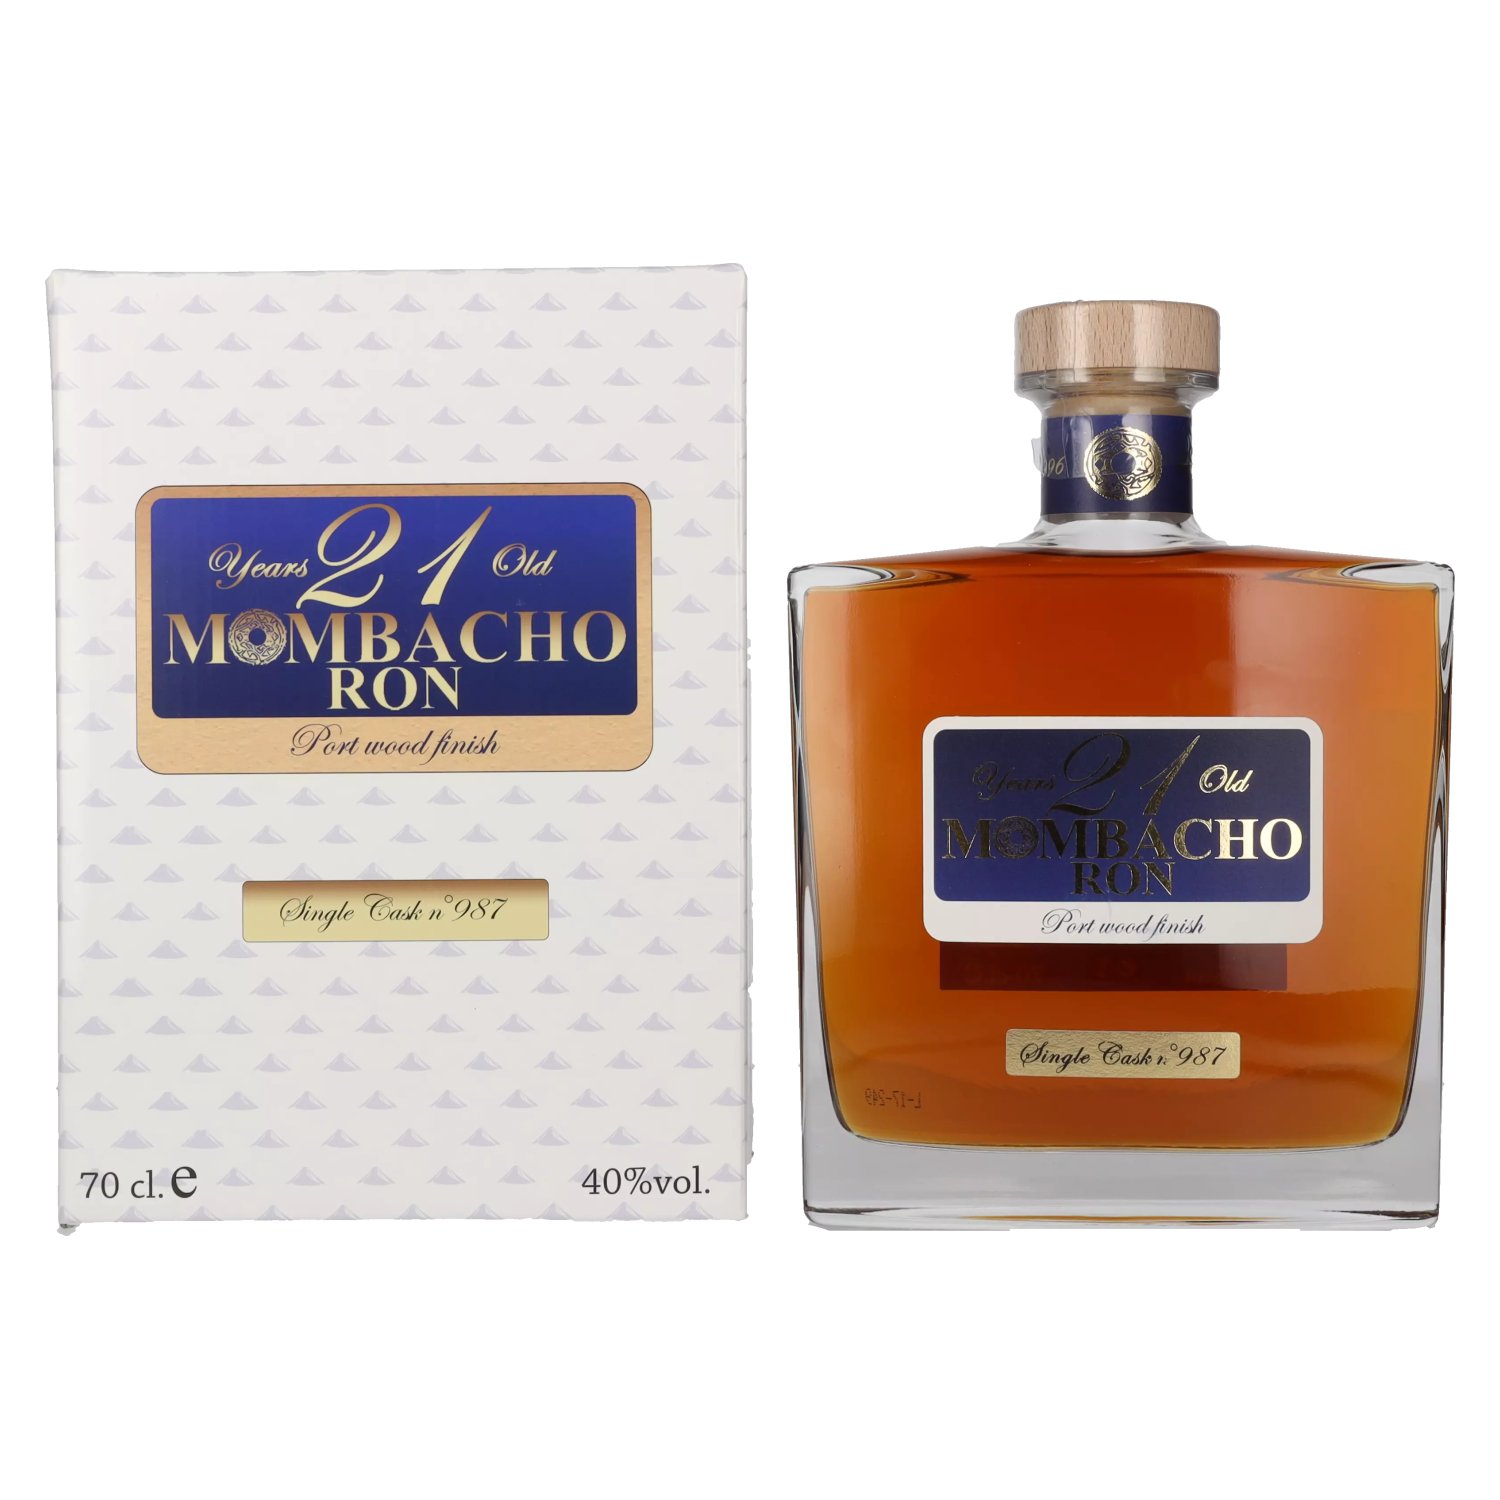 Years Ron 21 Finish Mombacho Wood 0,7l Port in Old Vol. 40% Giftbox